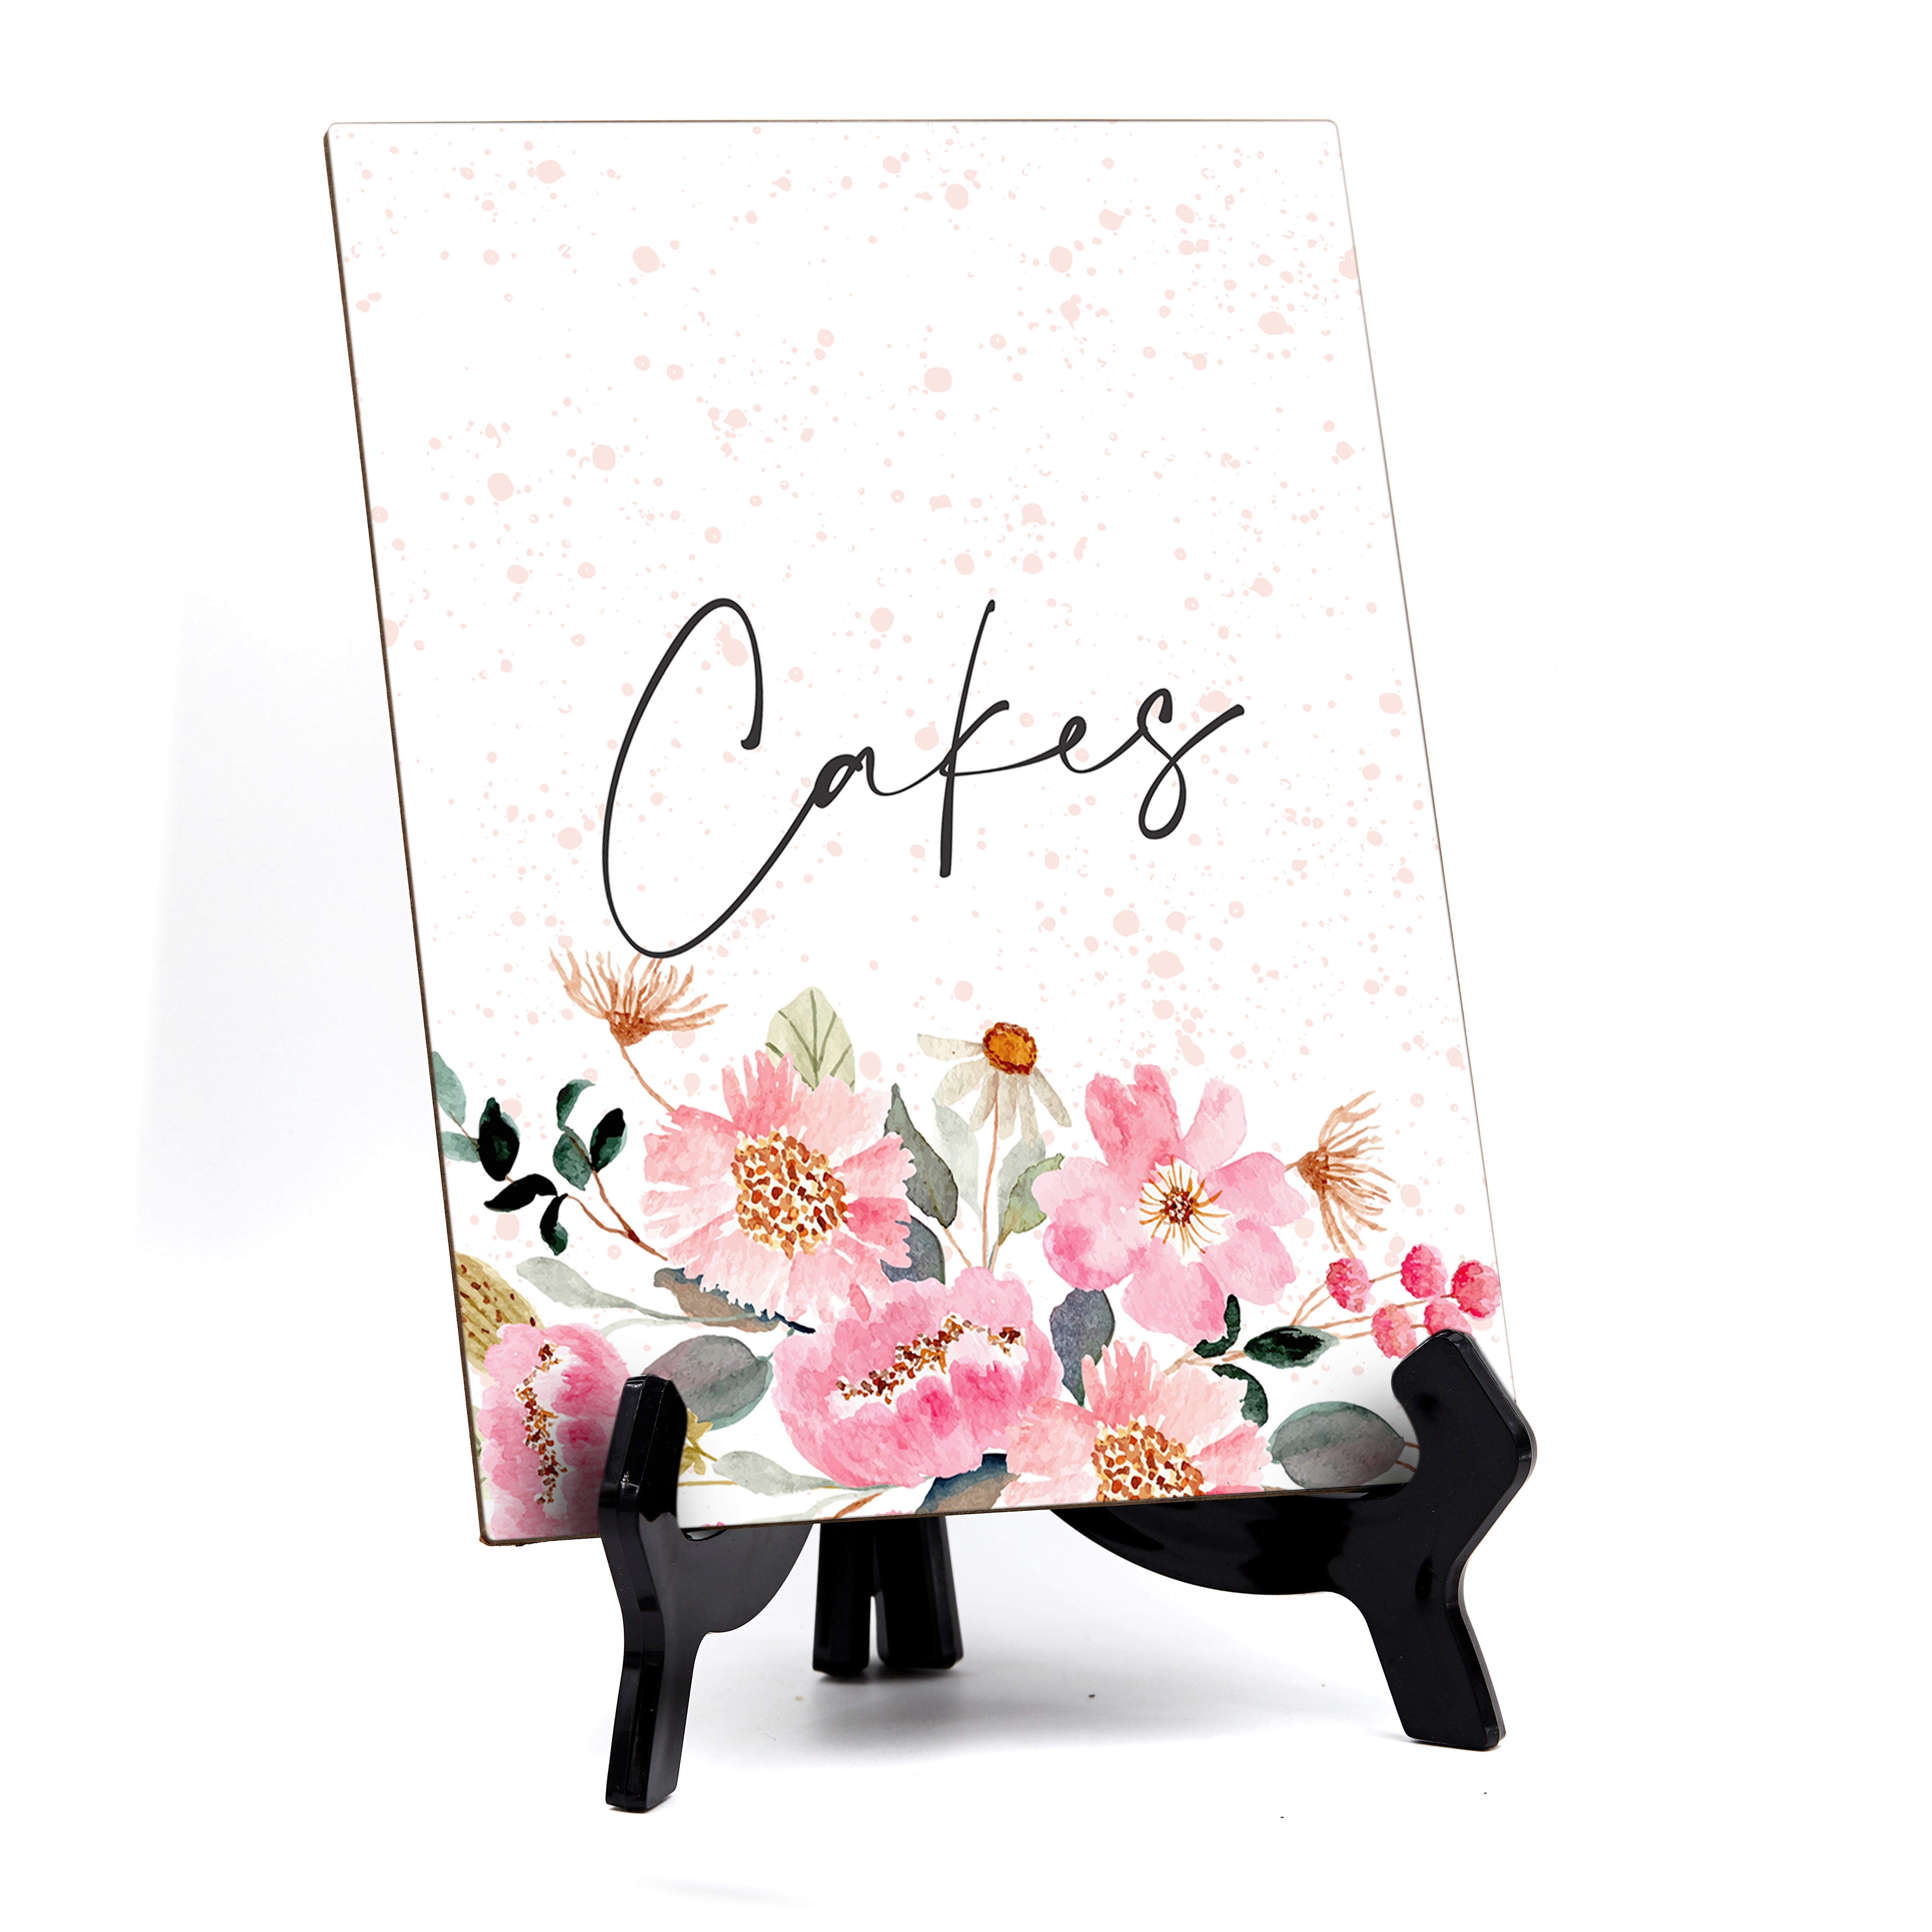 Cakes Table Sign with Easel, Floral Watercolor Design (6" x 8")